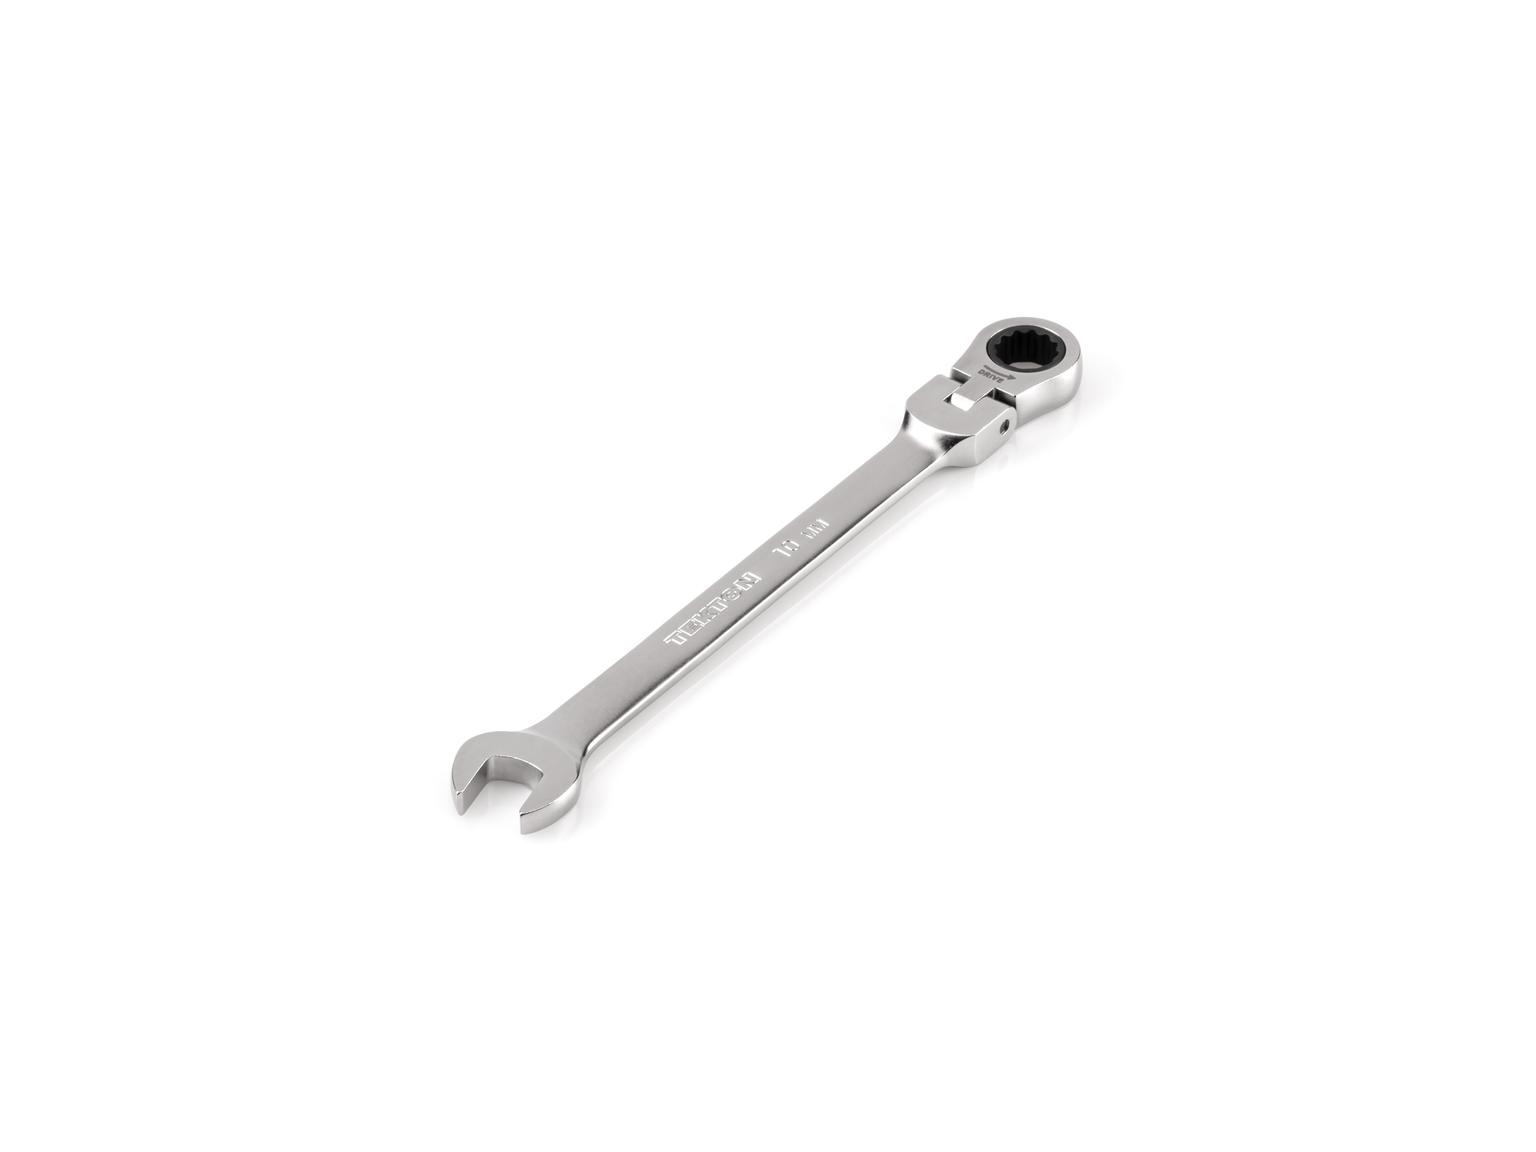 TEKTON WRC26410-T 10 mm Flex Head 12-Point Ratcheting Combination Wrench